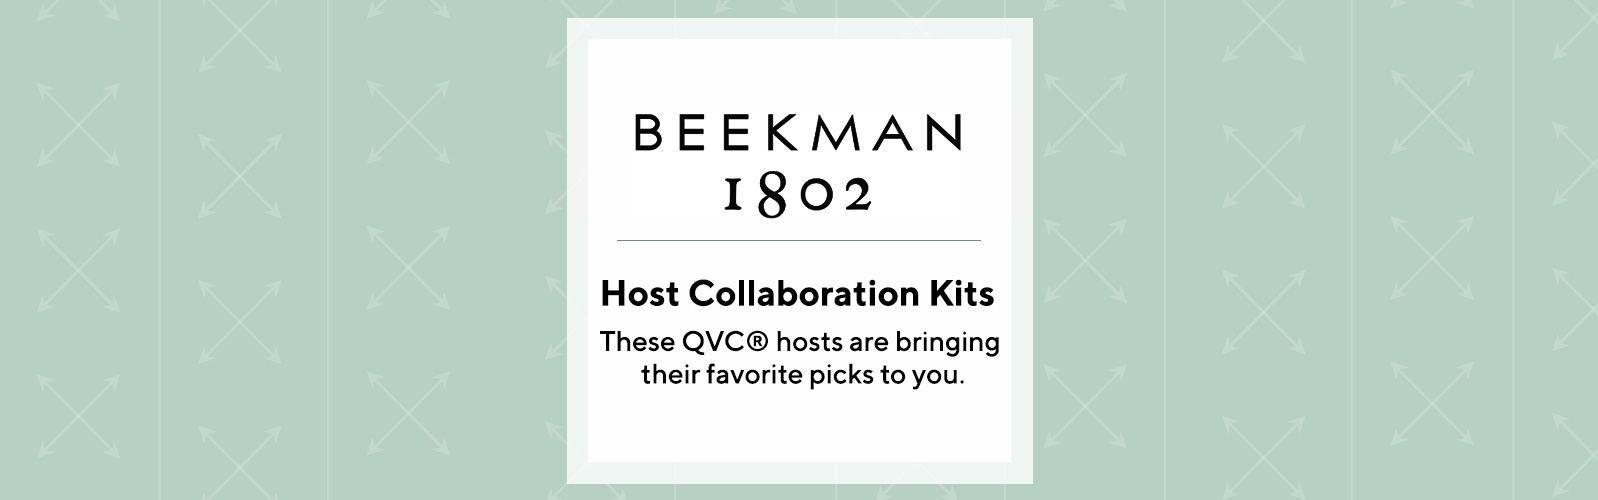 Beekman 1802 - Host Collaboration Kits - These QVC® hosts are bringing their favorite picks to you.